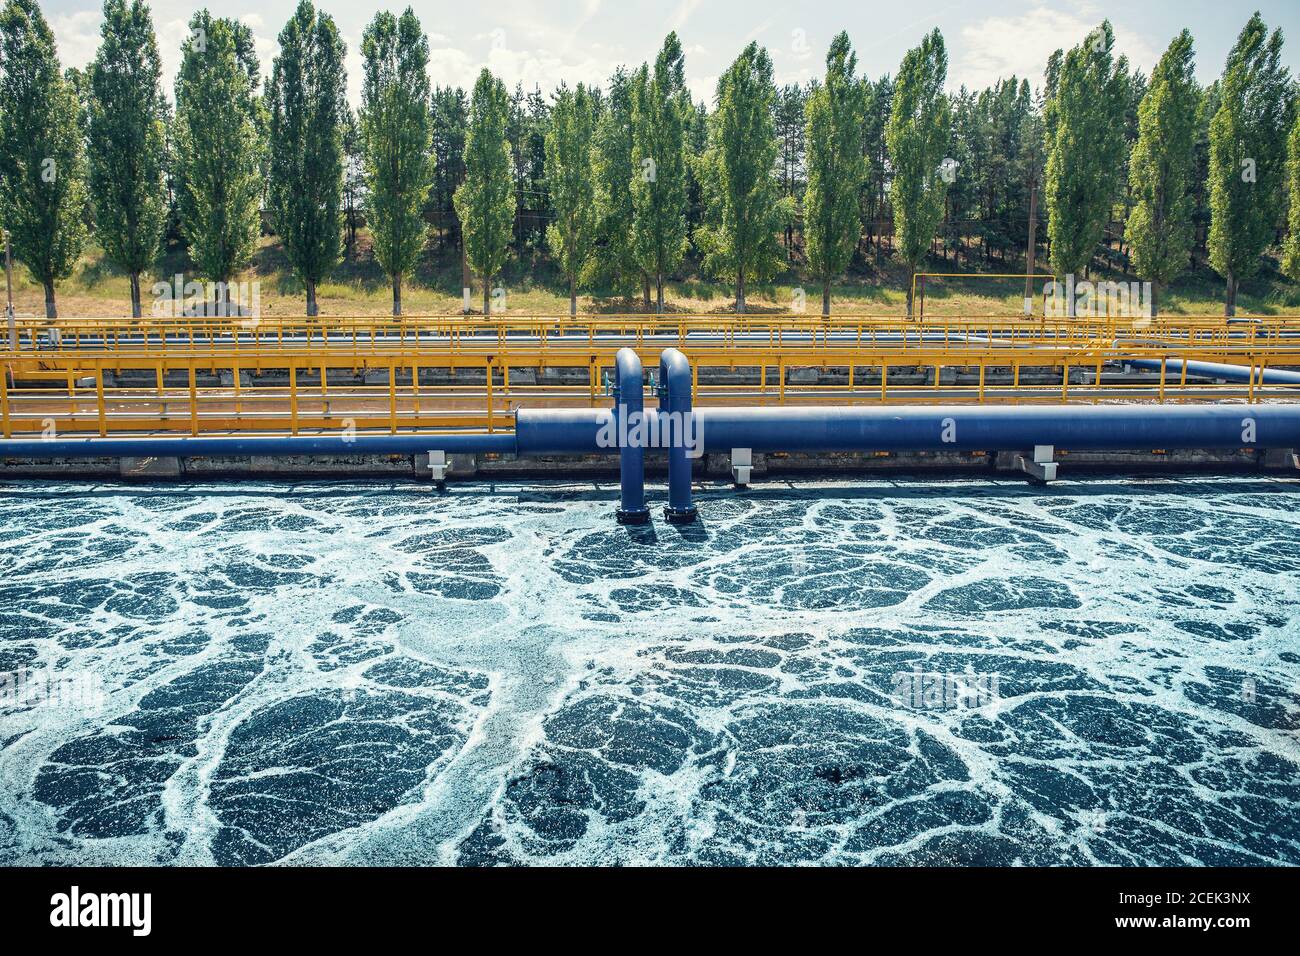 Reservoir for aeration and biological purification of sewage at wastewater treatment plant. Stock Photo